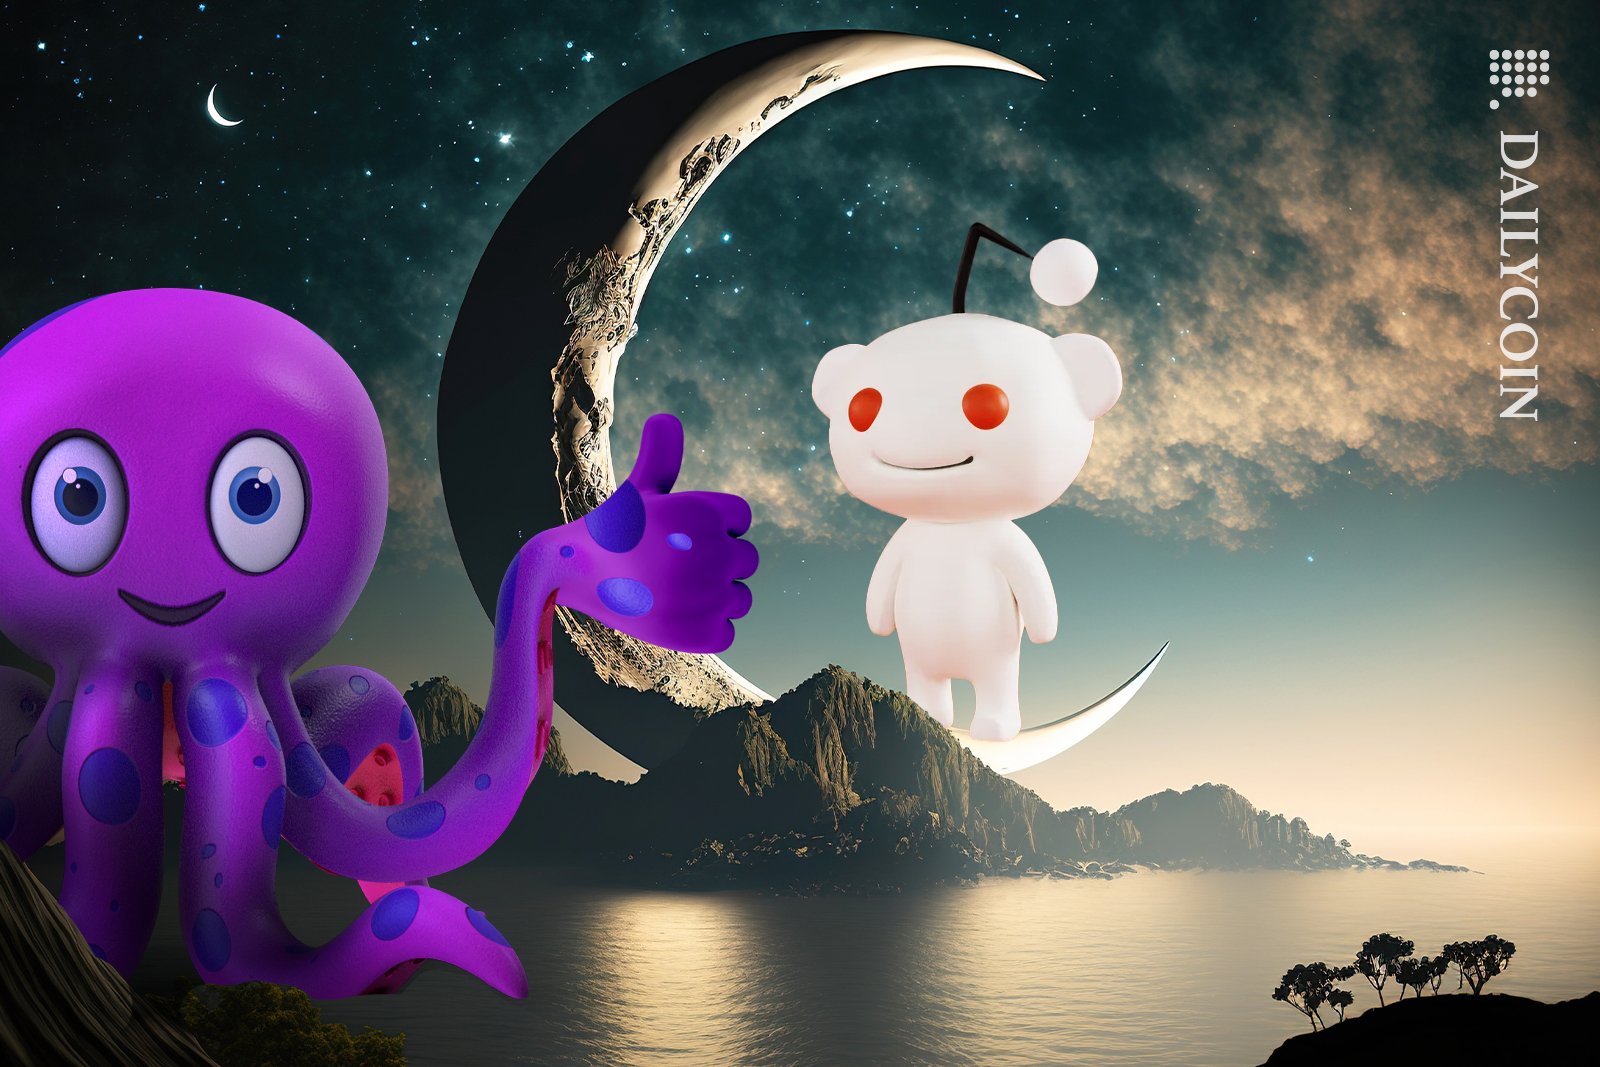 Kraken character showing thumbs up to Reddit mascot on the moon.